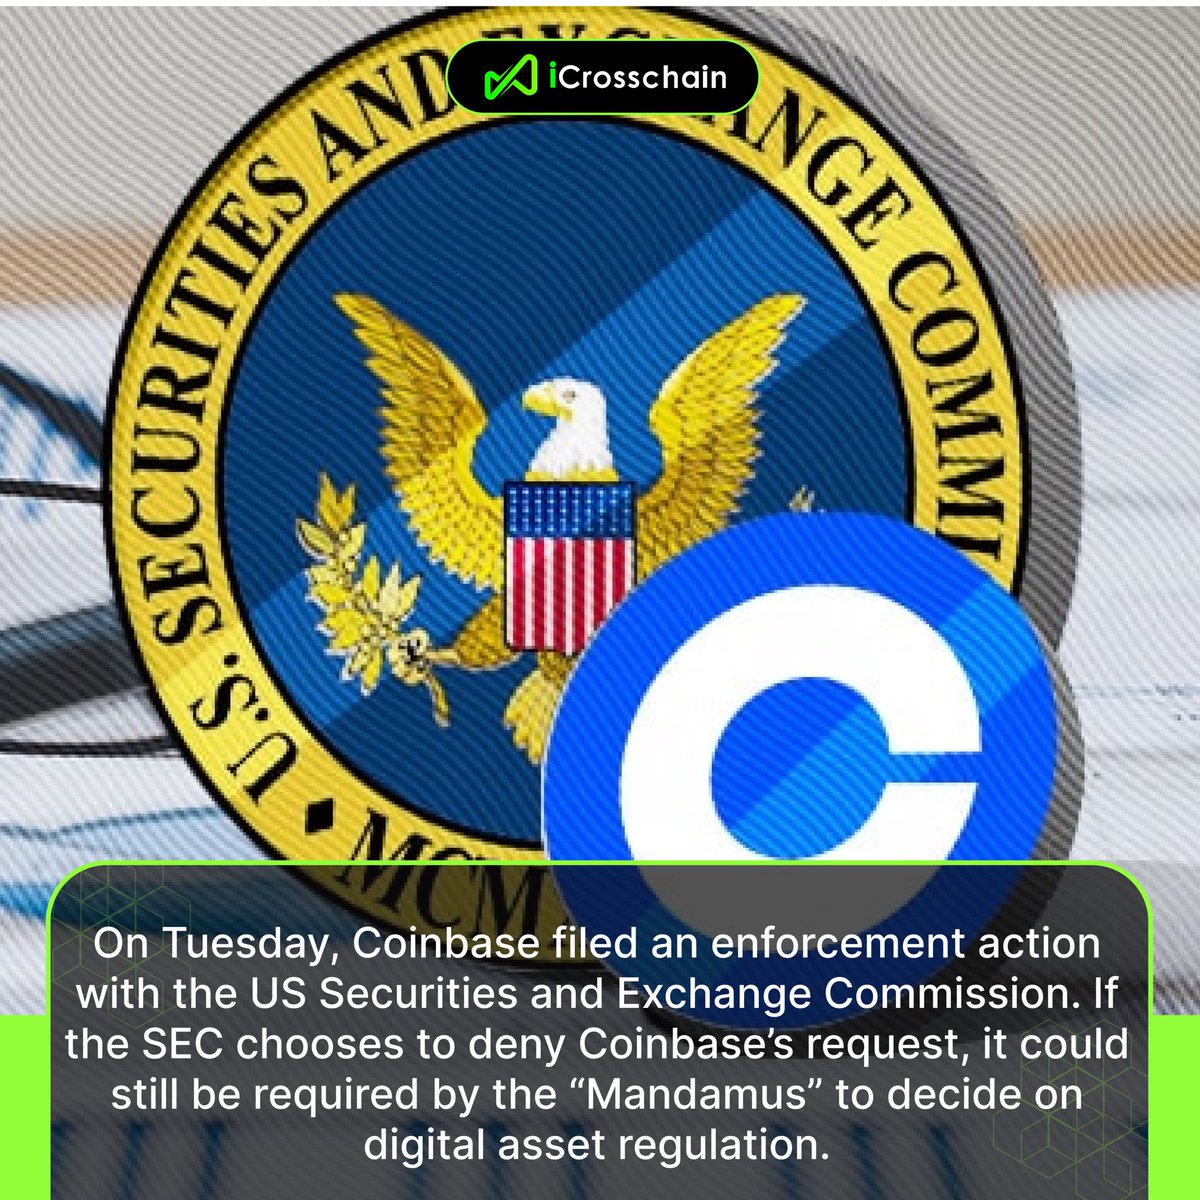 Coinbase has filed an answer in support of a US Securities and Exchange Commission (SEC) petition in its latest move to seek a rule from the SEC for digital assets. Coinbase’s chief legal officer, Paul Grewal, called the mandamus “a fitting remedy for extraordinary truths.”

#ICC…